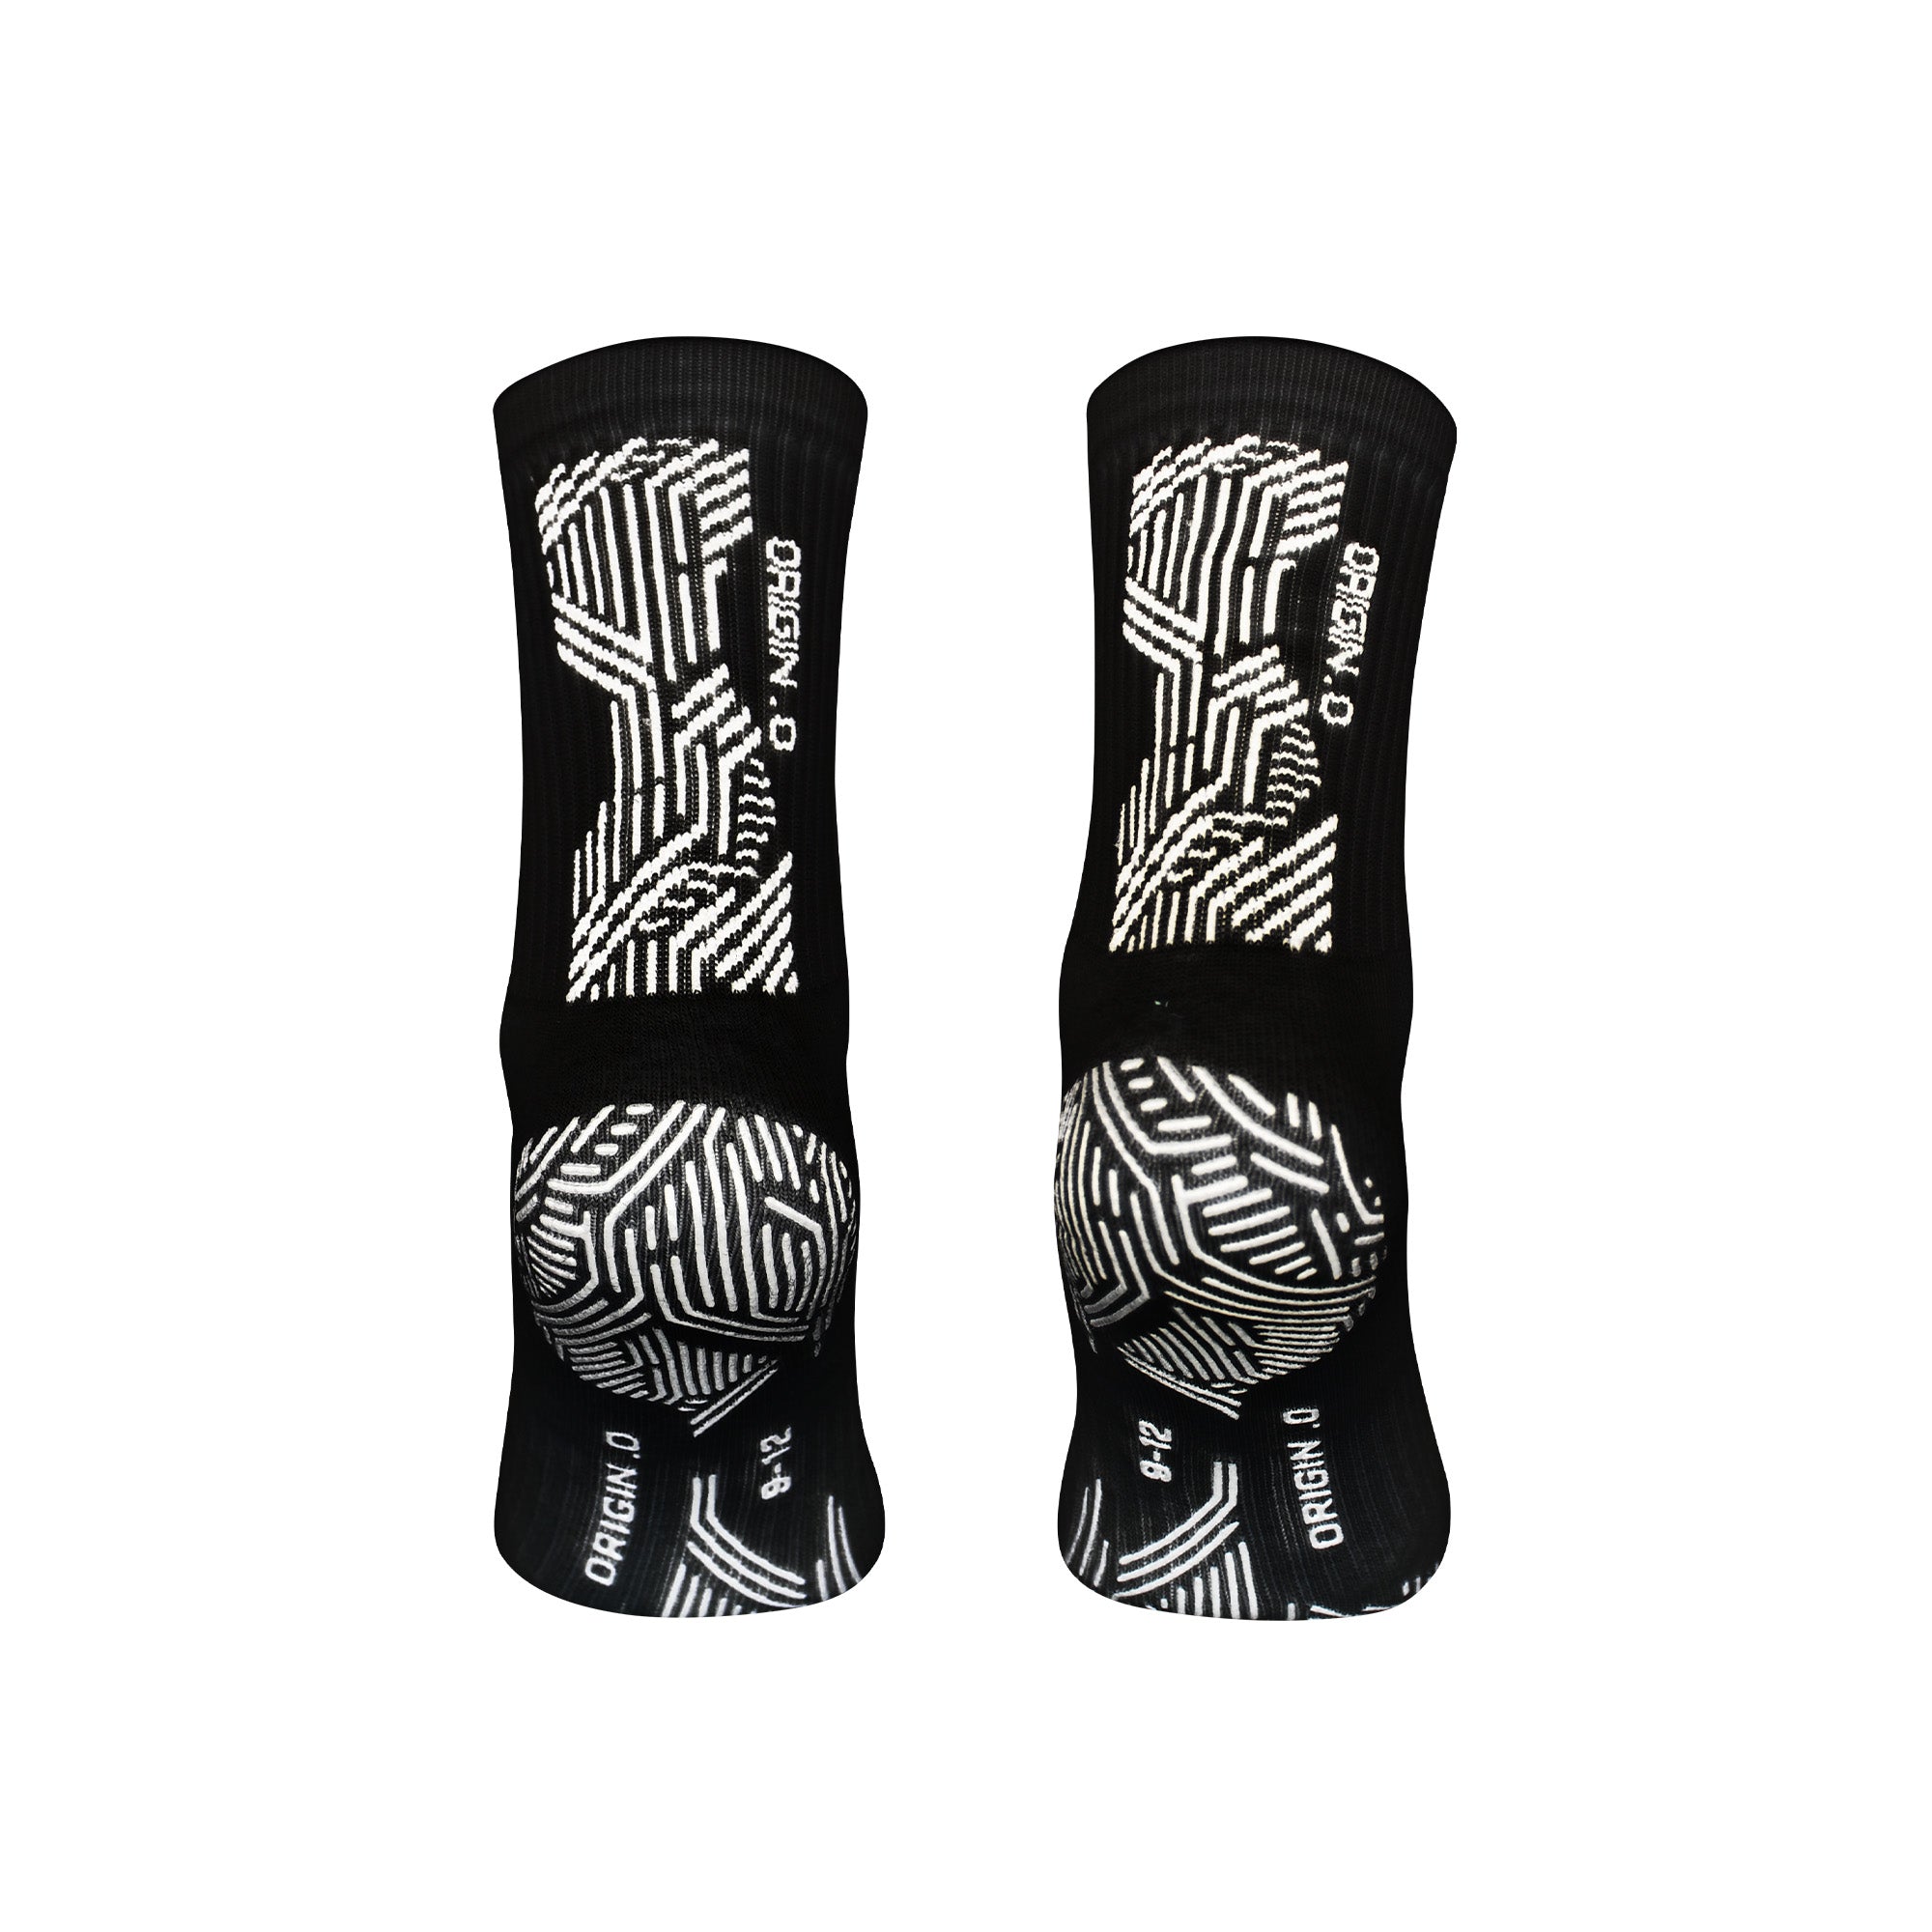 Greaves Sports - FALKE 4 GRIP socks can optimise your individual